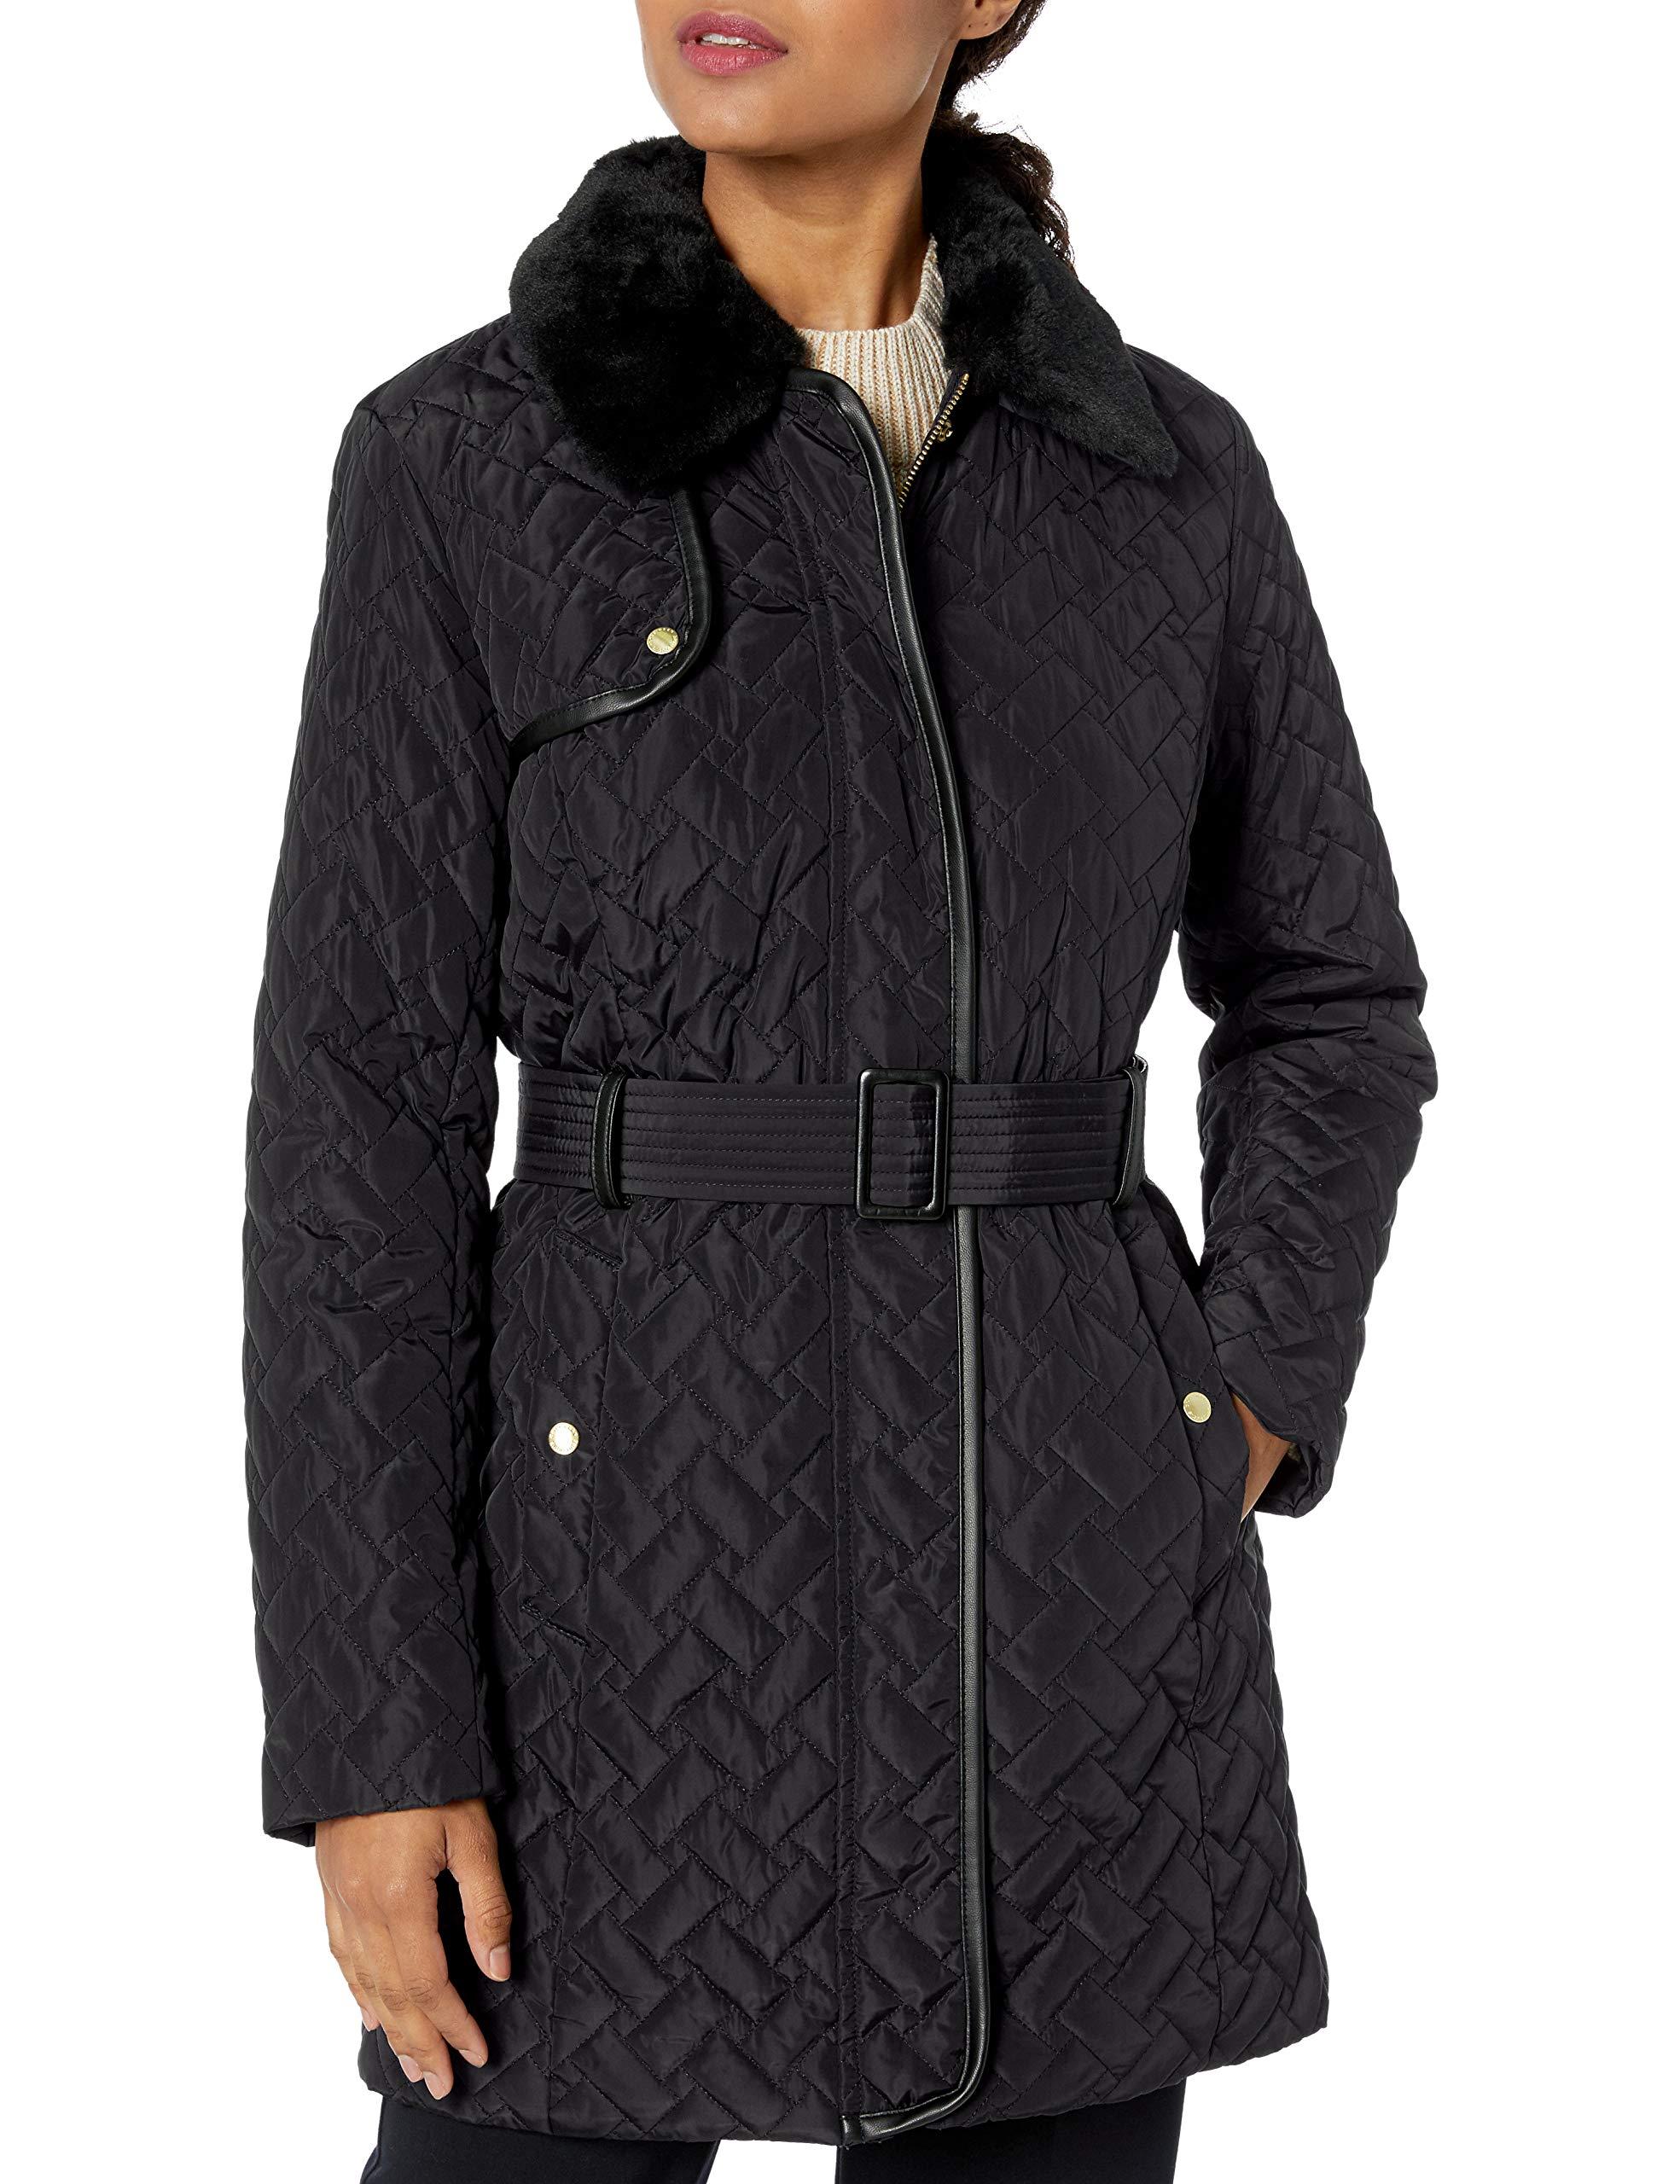 Cole Haan Quilted Trench Coat in Black - Lyst